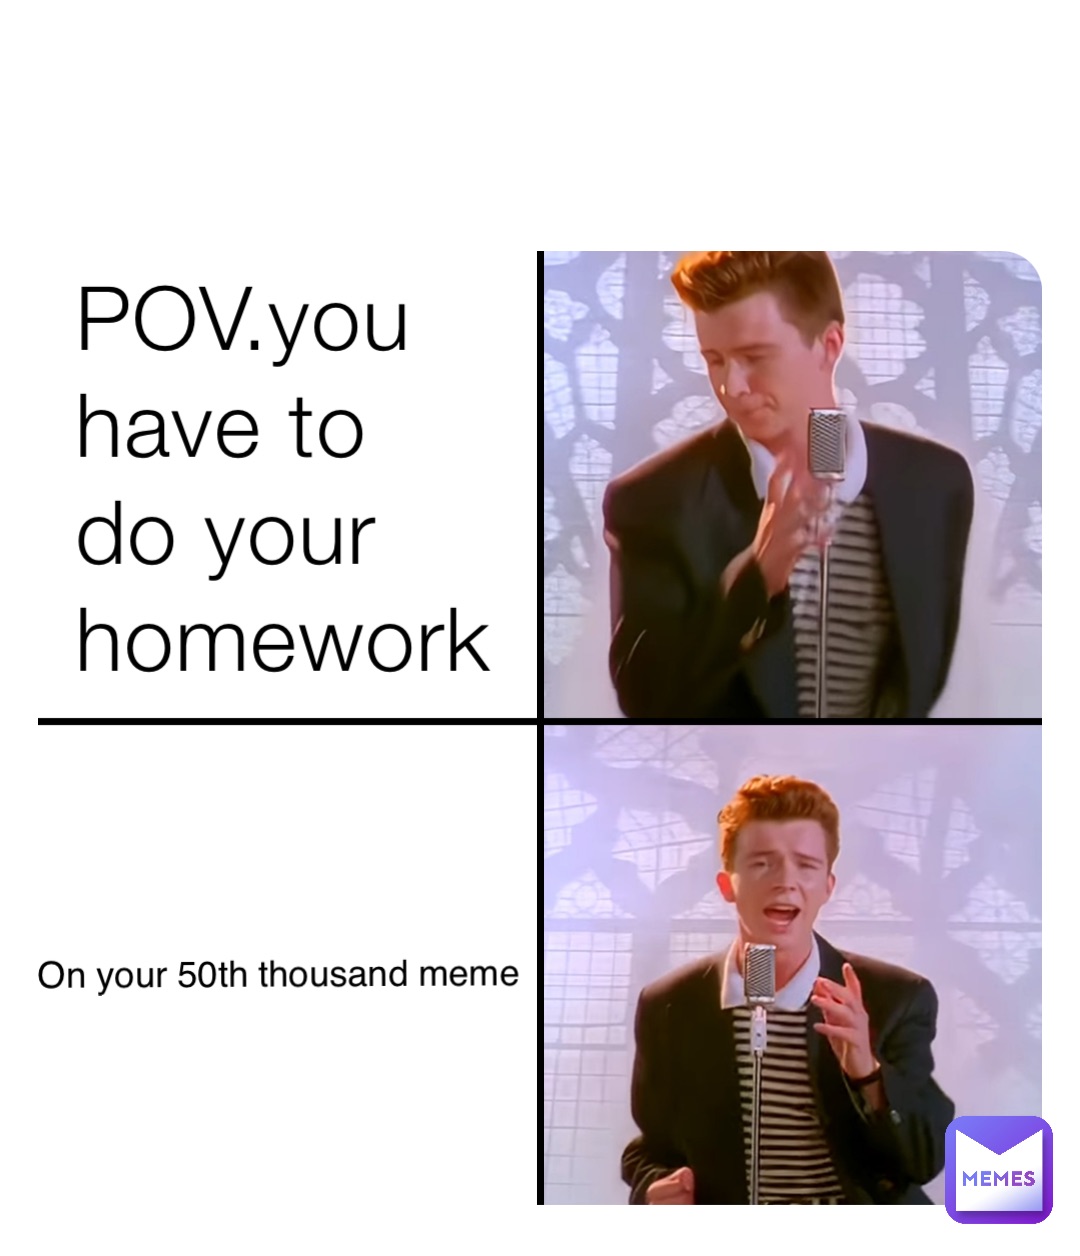 POV.you have to do your homework On your 50th thousand meme